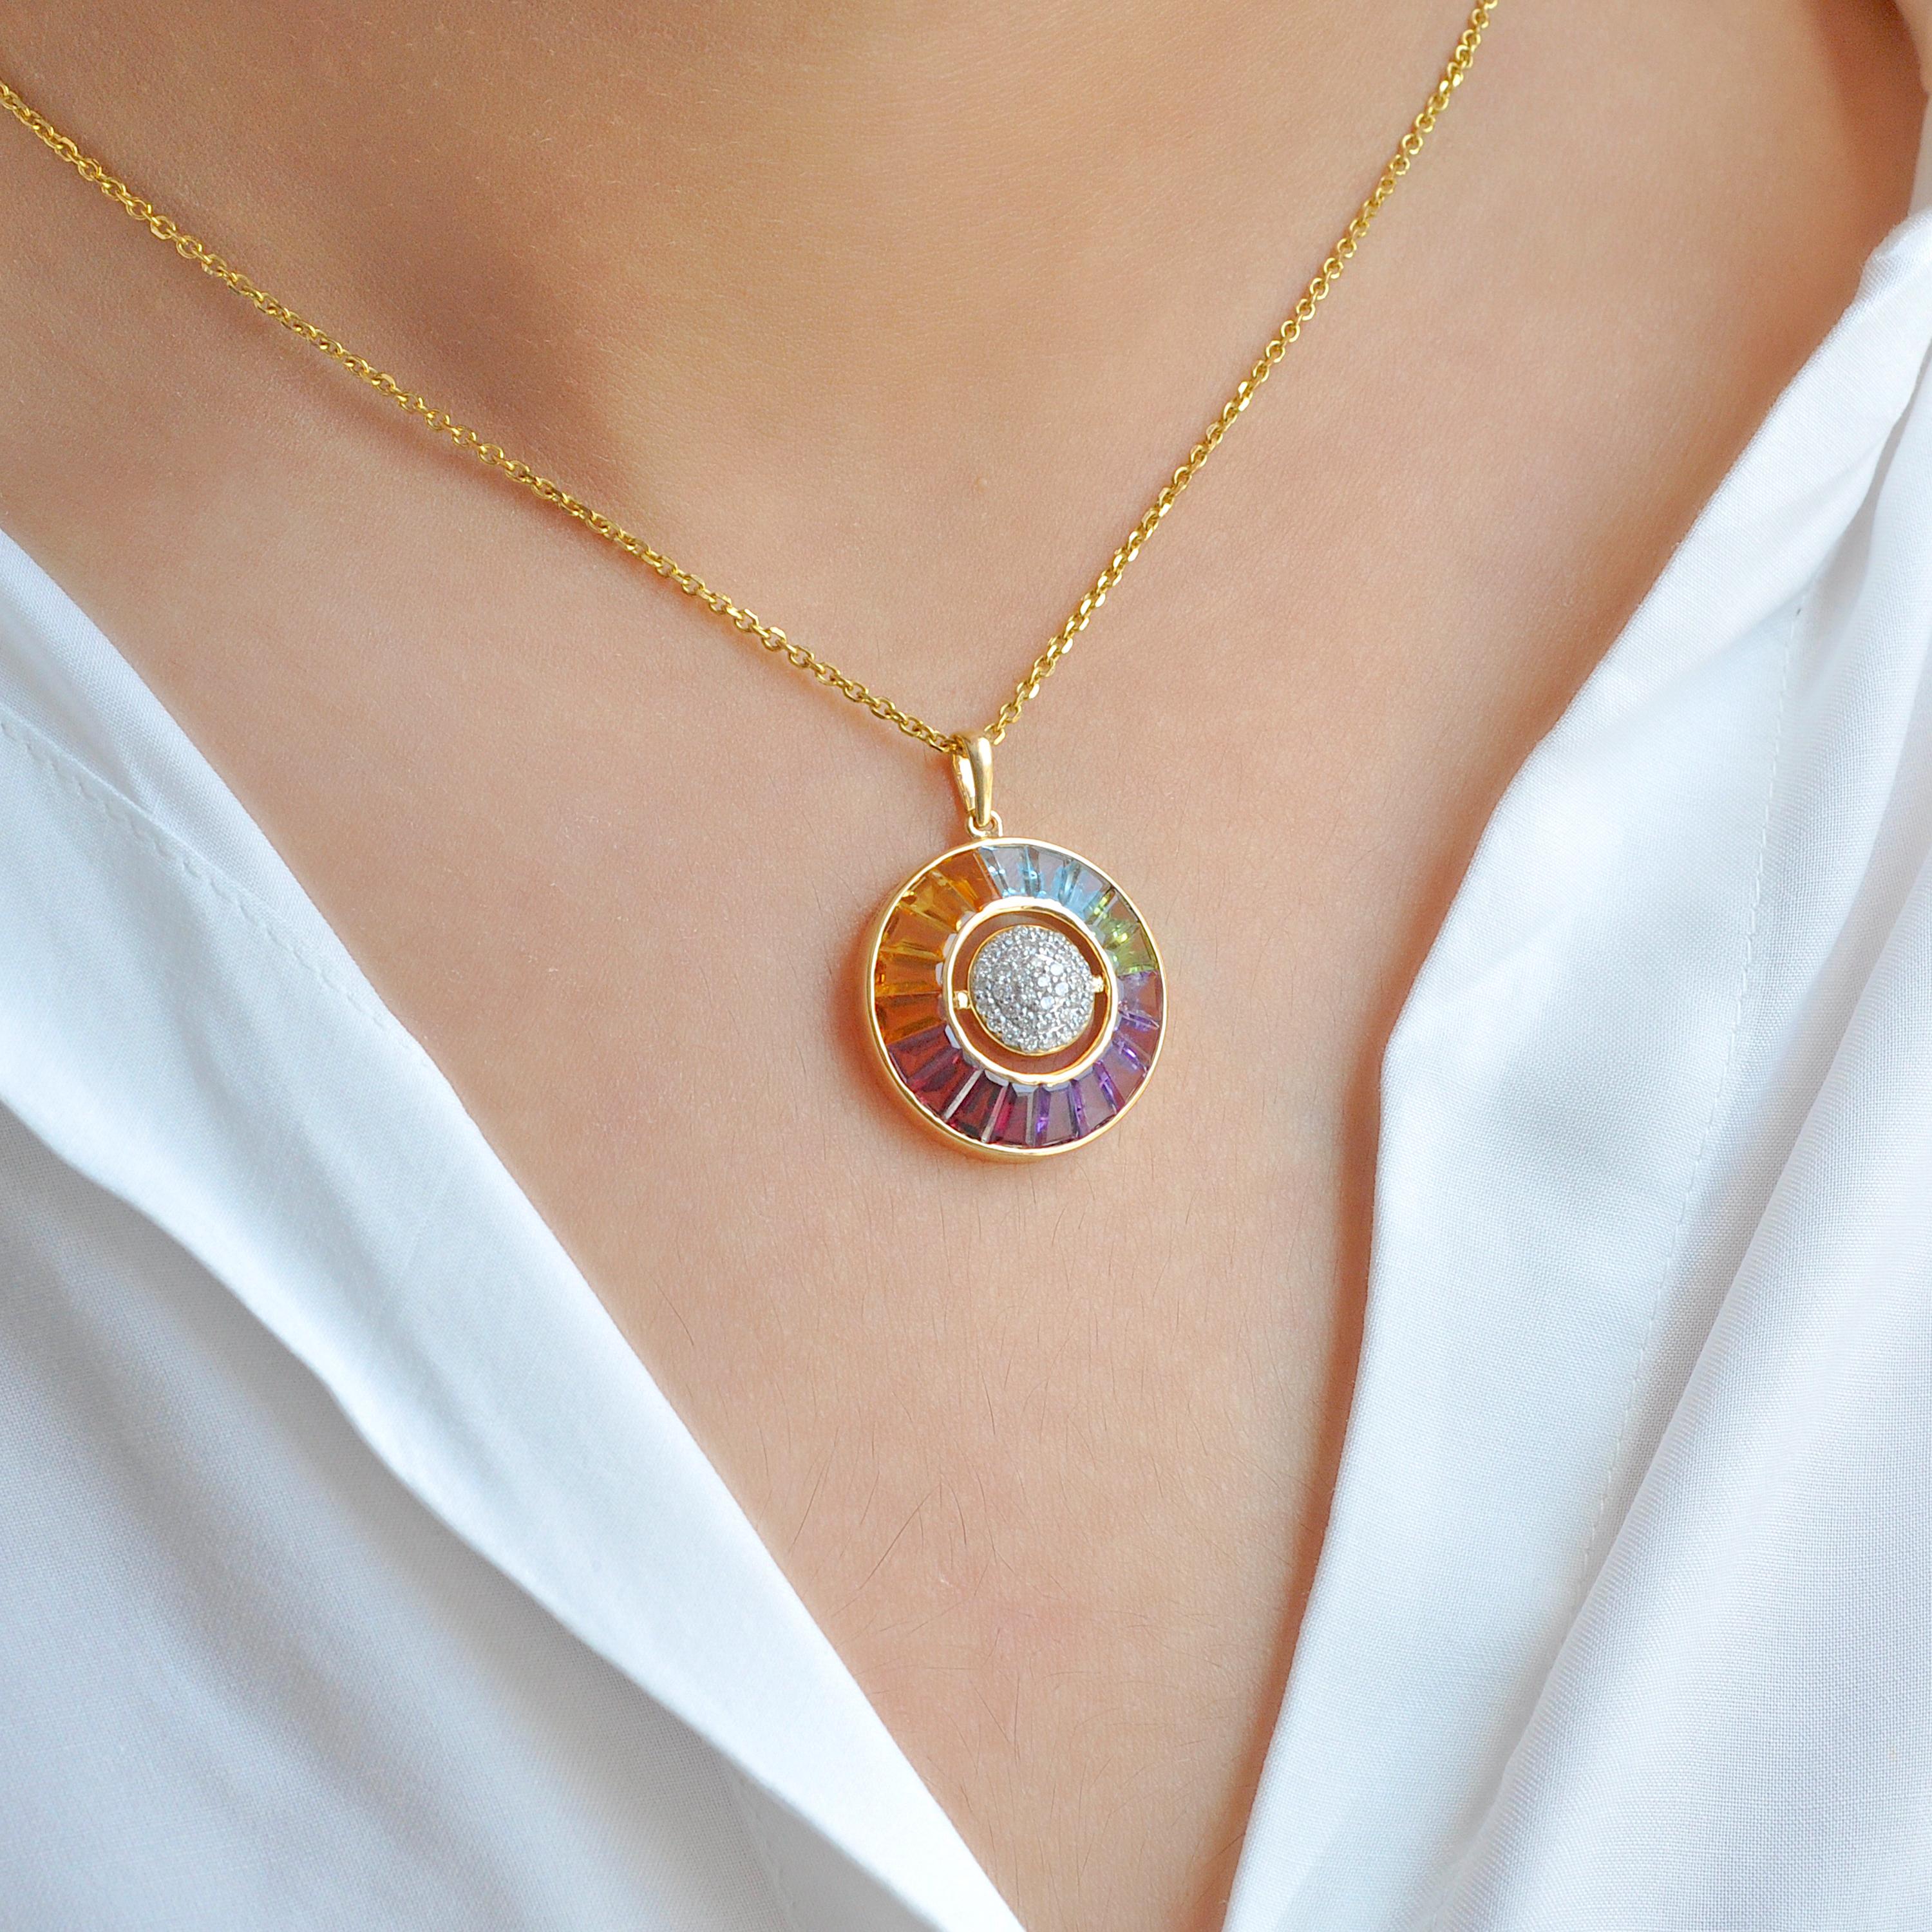 18K gold rainbow gemstone circle diamond and ethiopian opal reversible pendant

This is our exquisite 18K gold rainbow gemstone circle diamond and opal reversible pendant is a true marvel of versatility and elegance. Crafted with meticulous